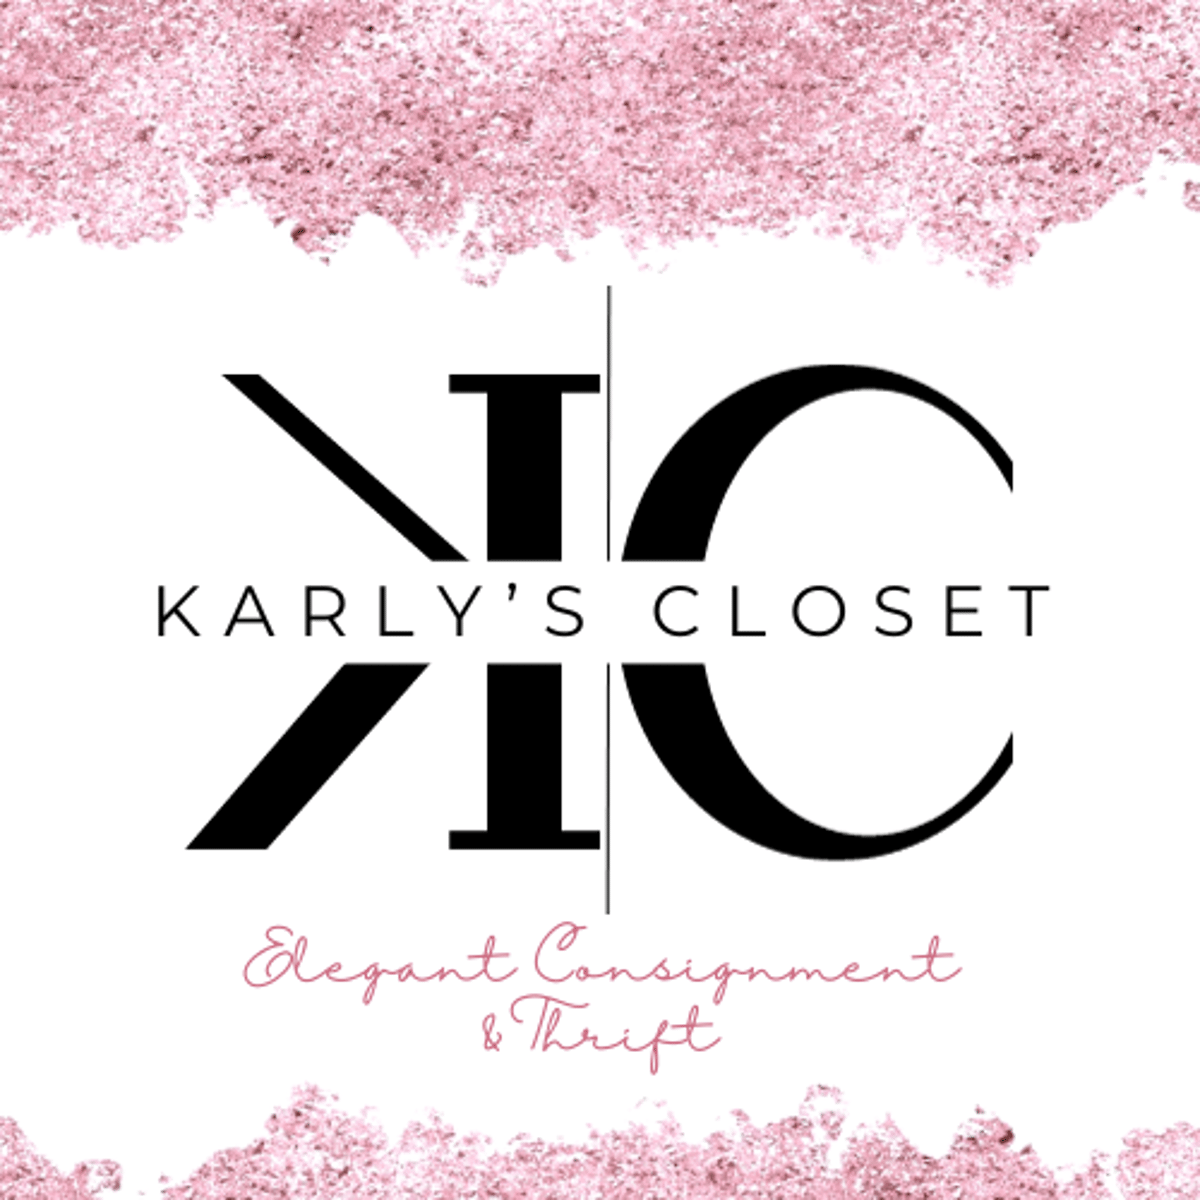 Women's Clothing Sale and Clearance · The Karlyshh Closet